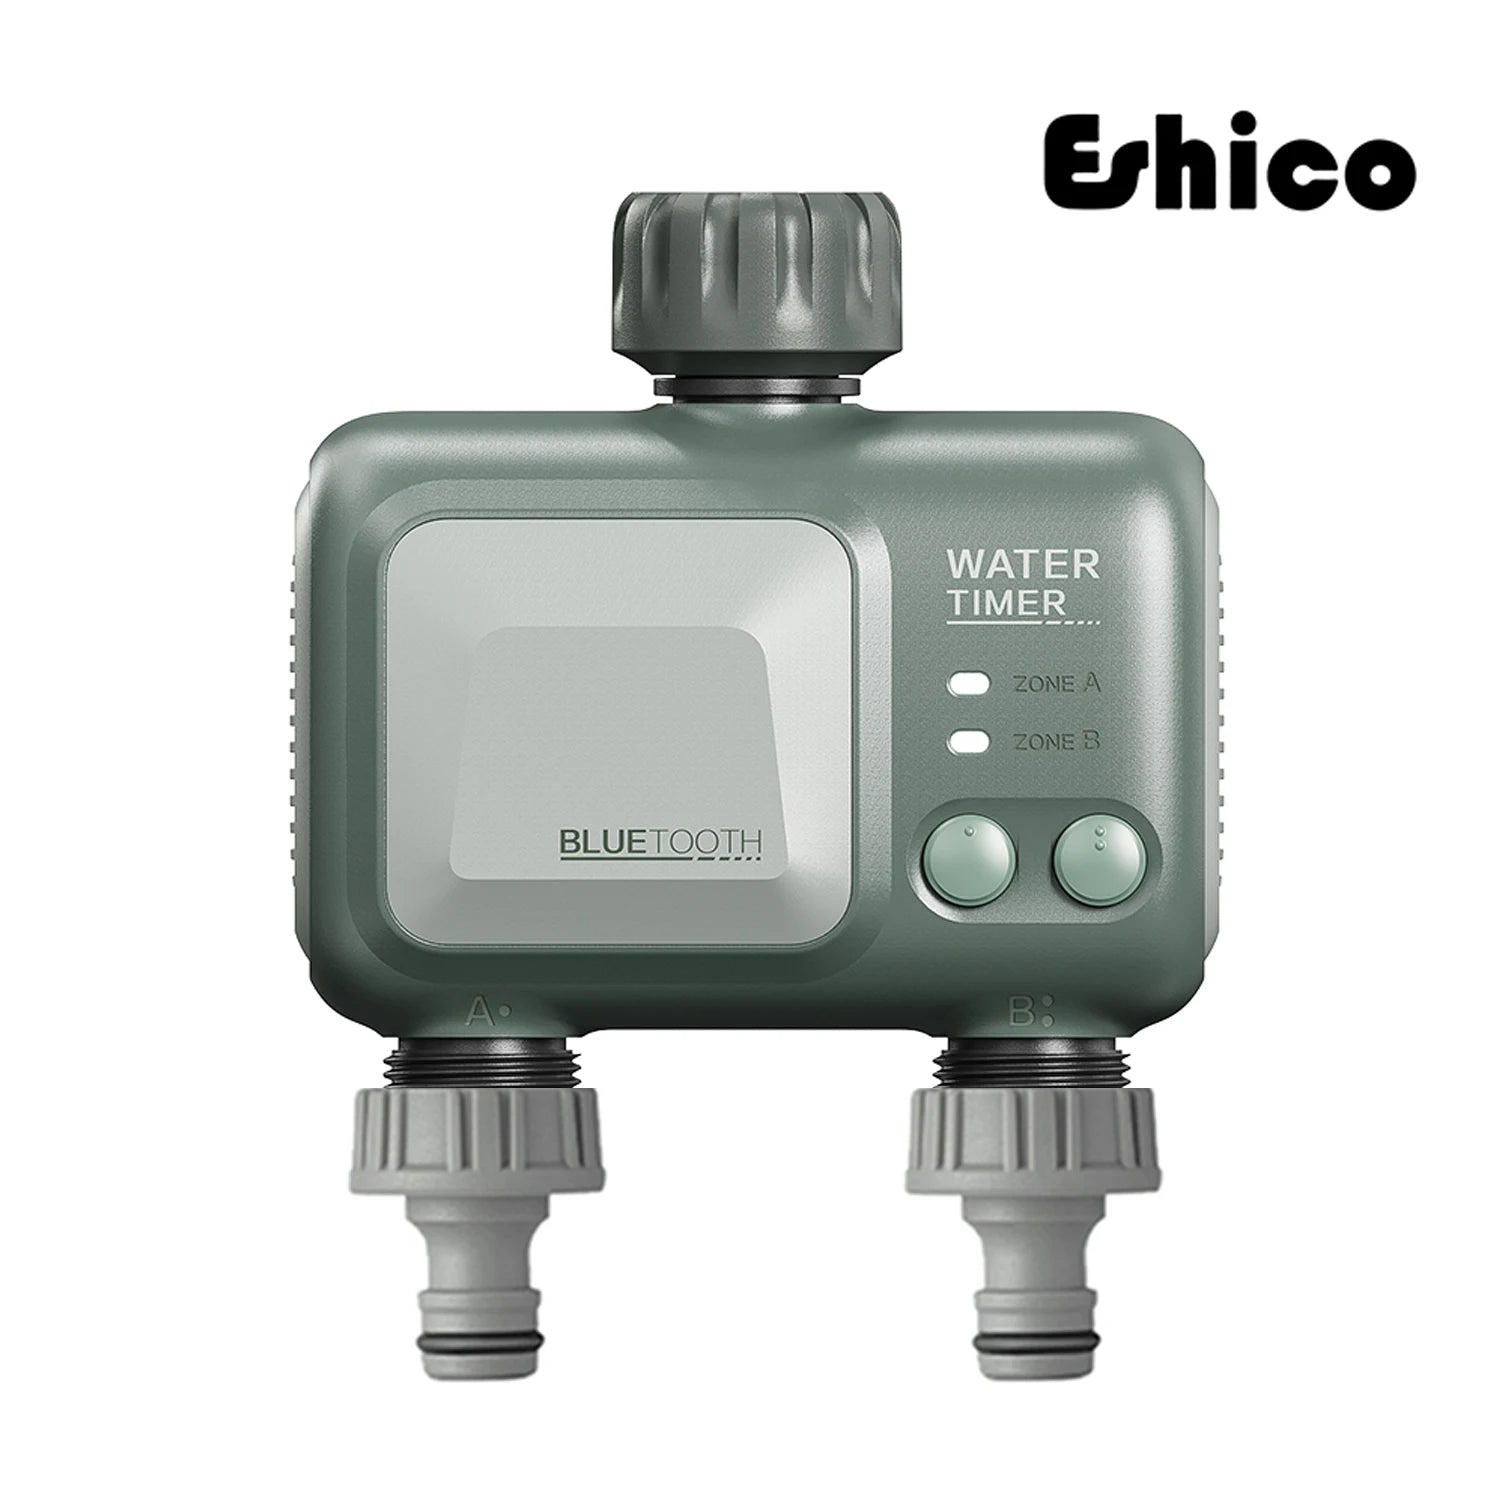 Eshico 2-Outlet Wireless Water Timer HCT-626 Bluetooth WiFi Irrigation Sprinkler Mobile Control Setting Garden Watering Tools